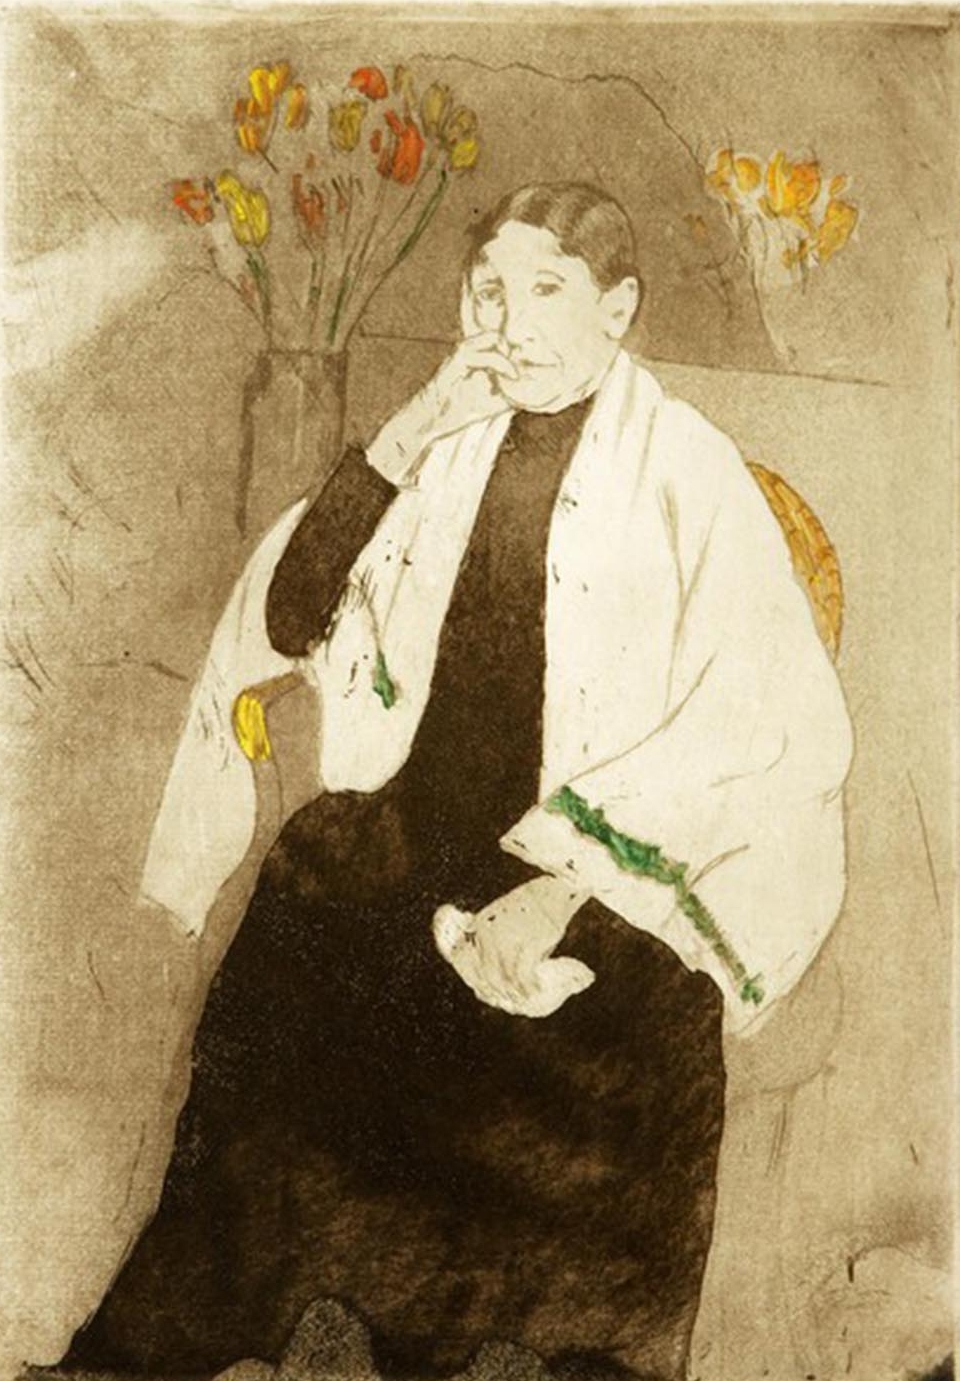 An artwork depicting a person wearing a dark dress and white shawl looking directly at the viewer with one hand propped on their face and the other hand in their lap holding a kerchief. Behind the seated person is a vase of flowers.